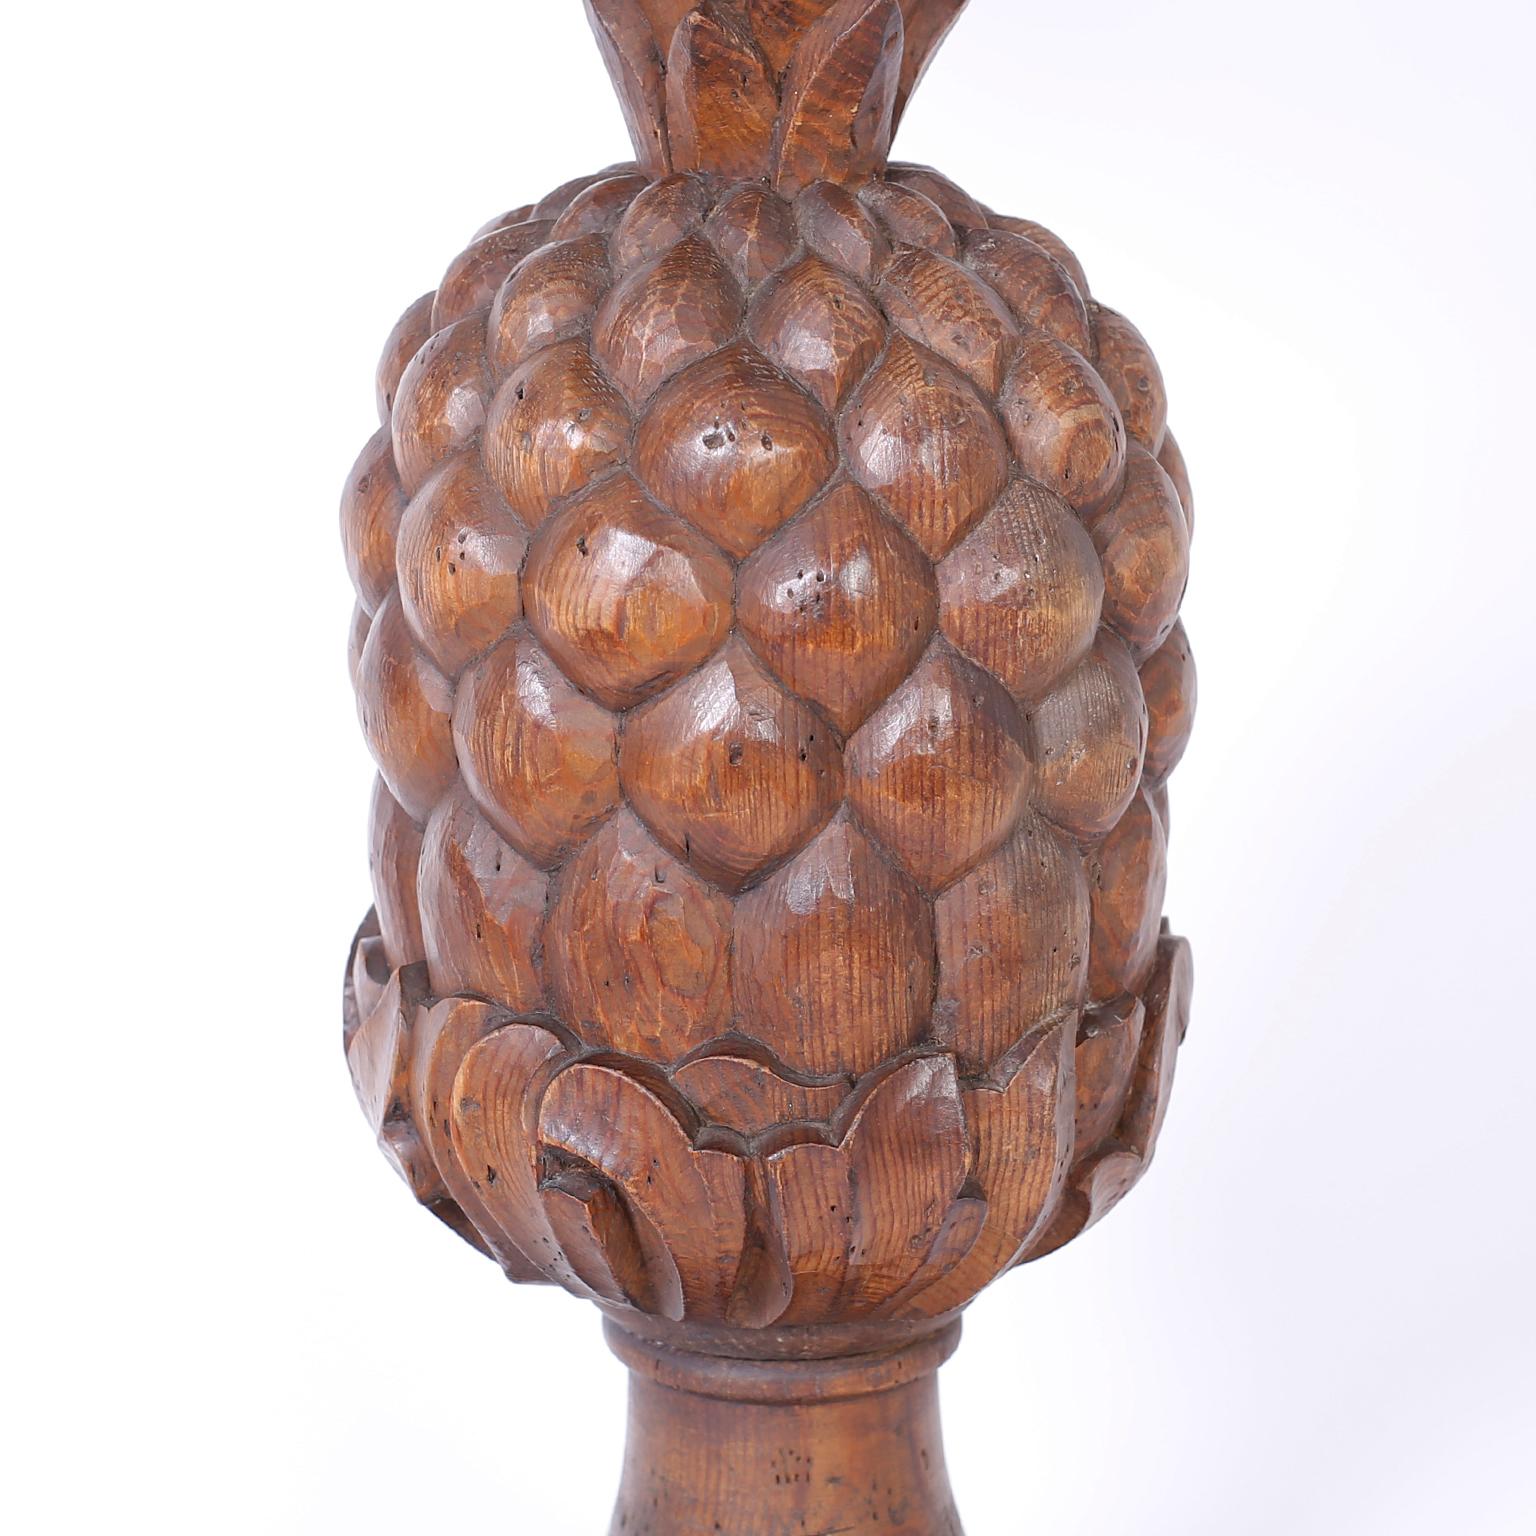 British Colonial Pair of Carved Wood Pineapple Table Lamps